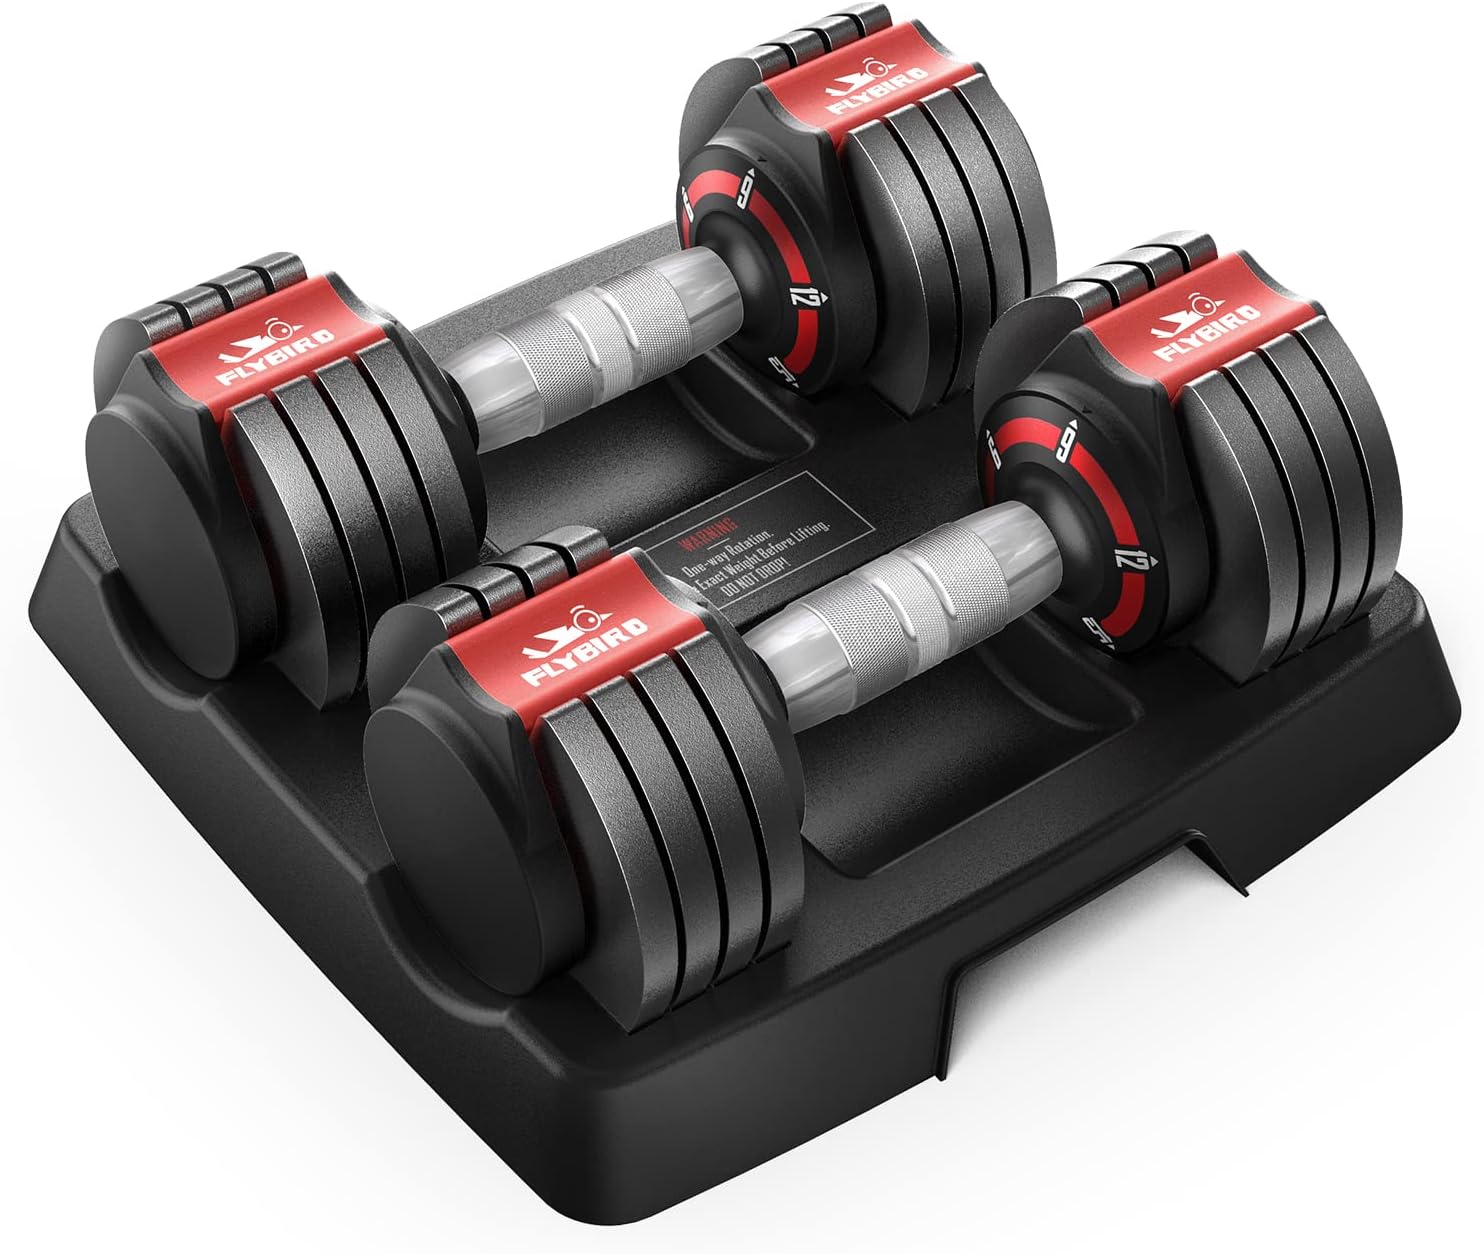 FLYBIRD+Adjustable+Dumbbells%2c15LB+Sets+of+2+for+Home+Gym+Exercise+%26+Fitness%2c+Fast+Change+Weights+with+Anti-Slip+Metal+Handle%2c+Multiweight+Options+for+Full+Body+Workout+Suitable+Men%2fWomen